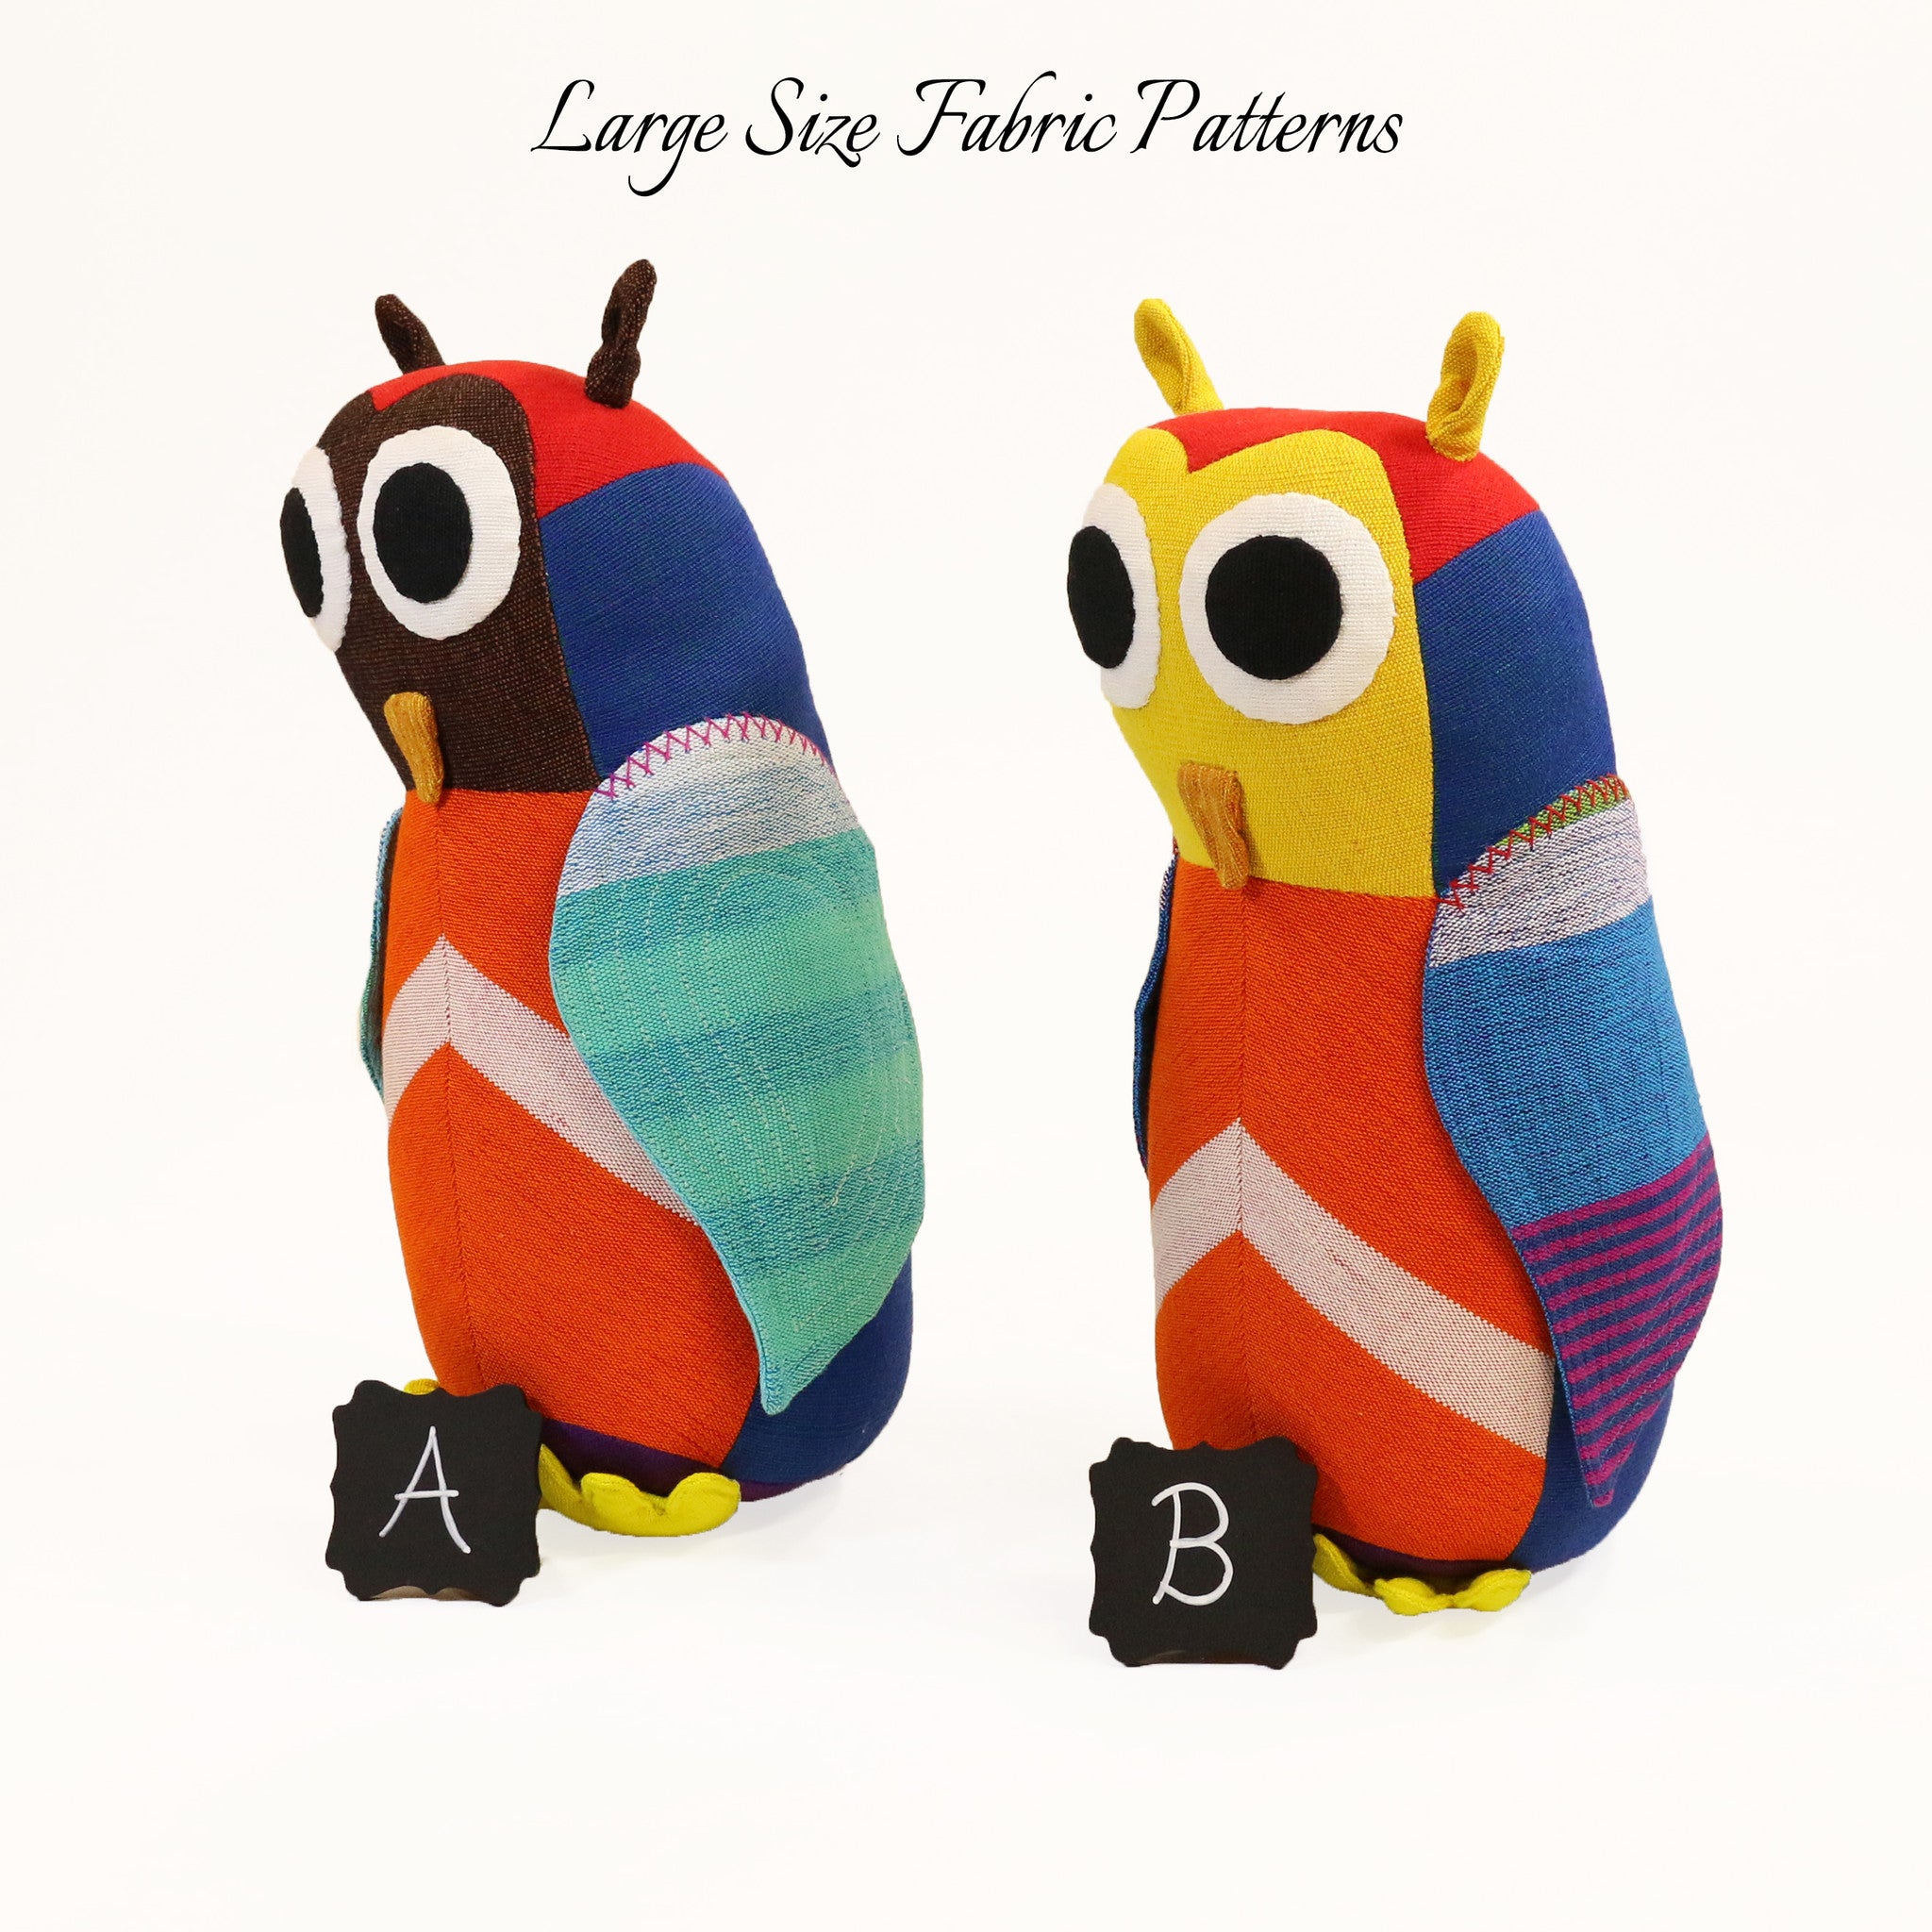 Horace, the Owl – all large size fabric patterns shown